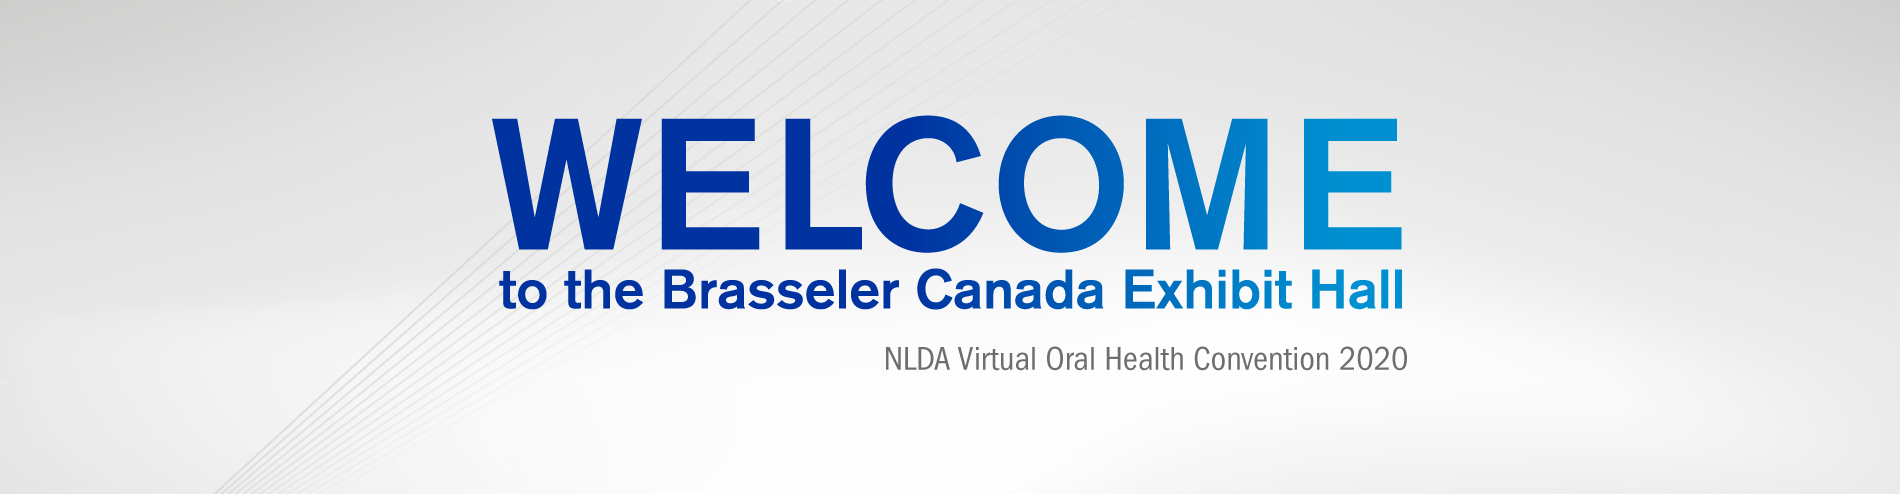 Welcome to the Brasseler Canada Exhibit Hall